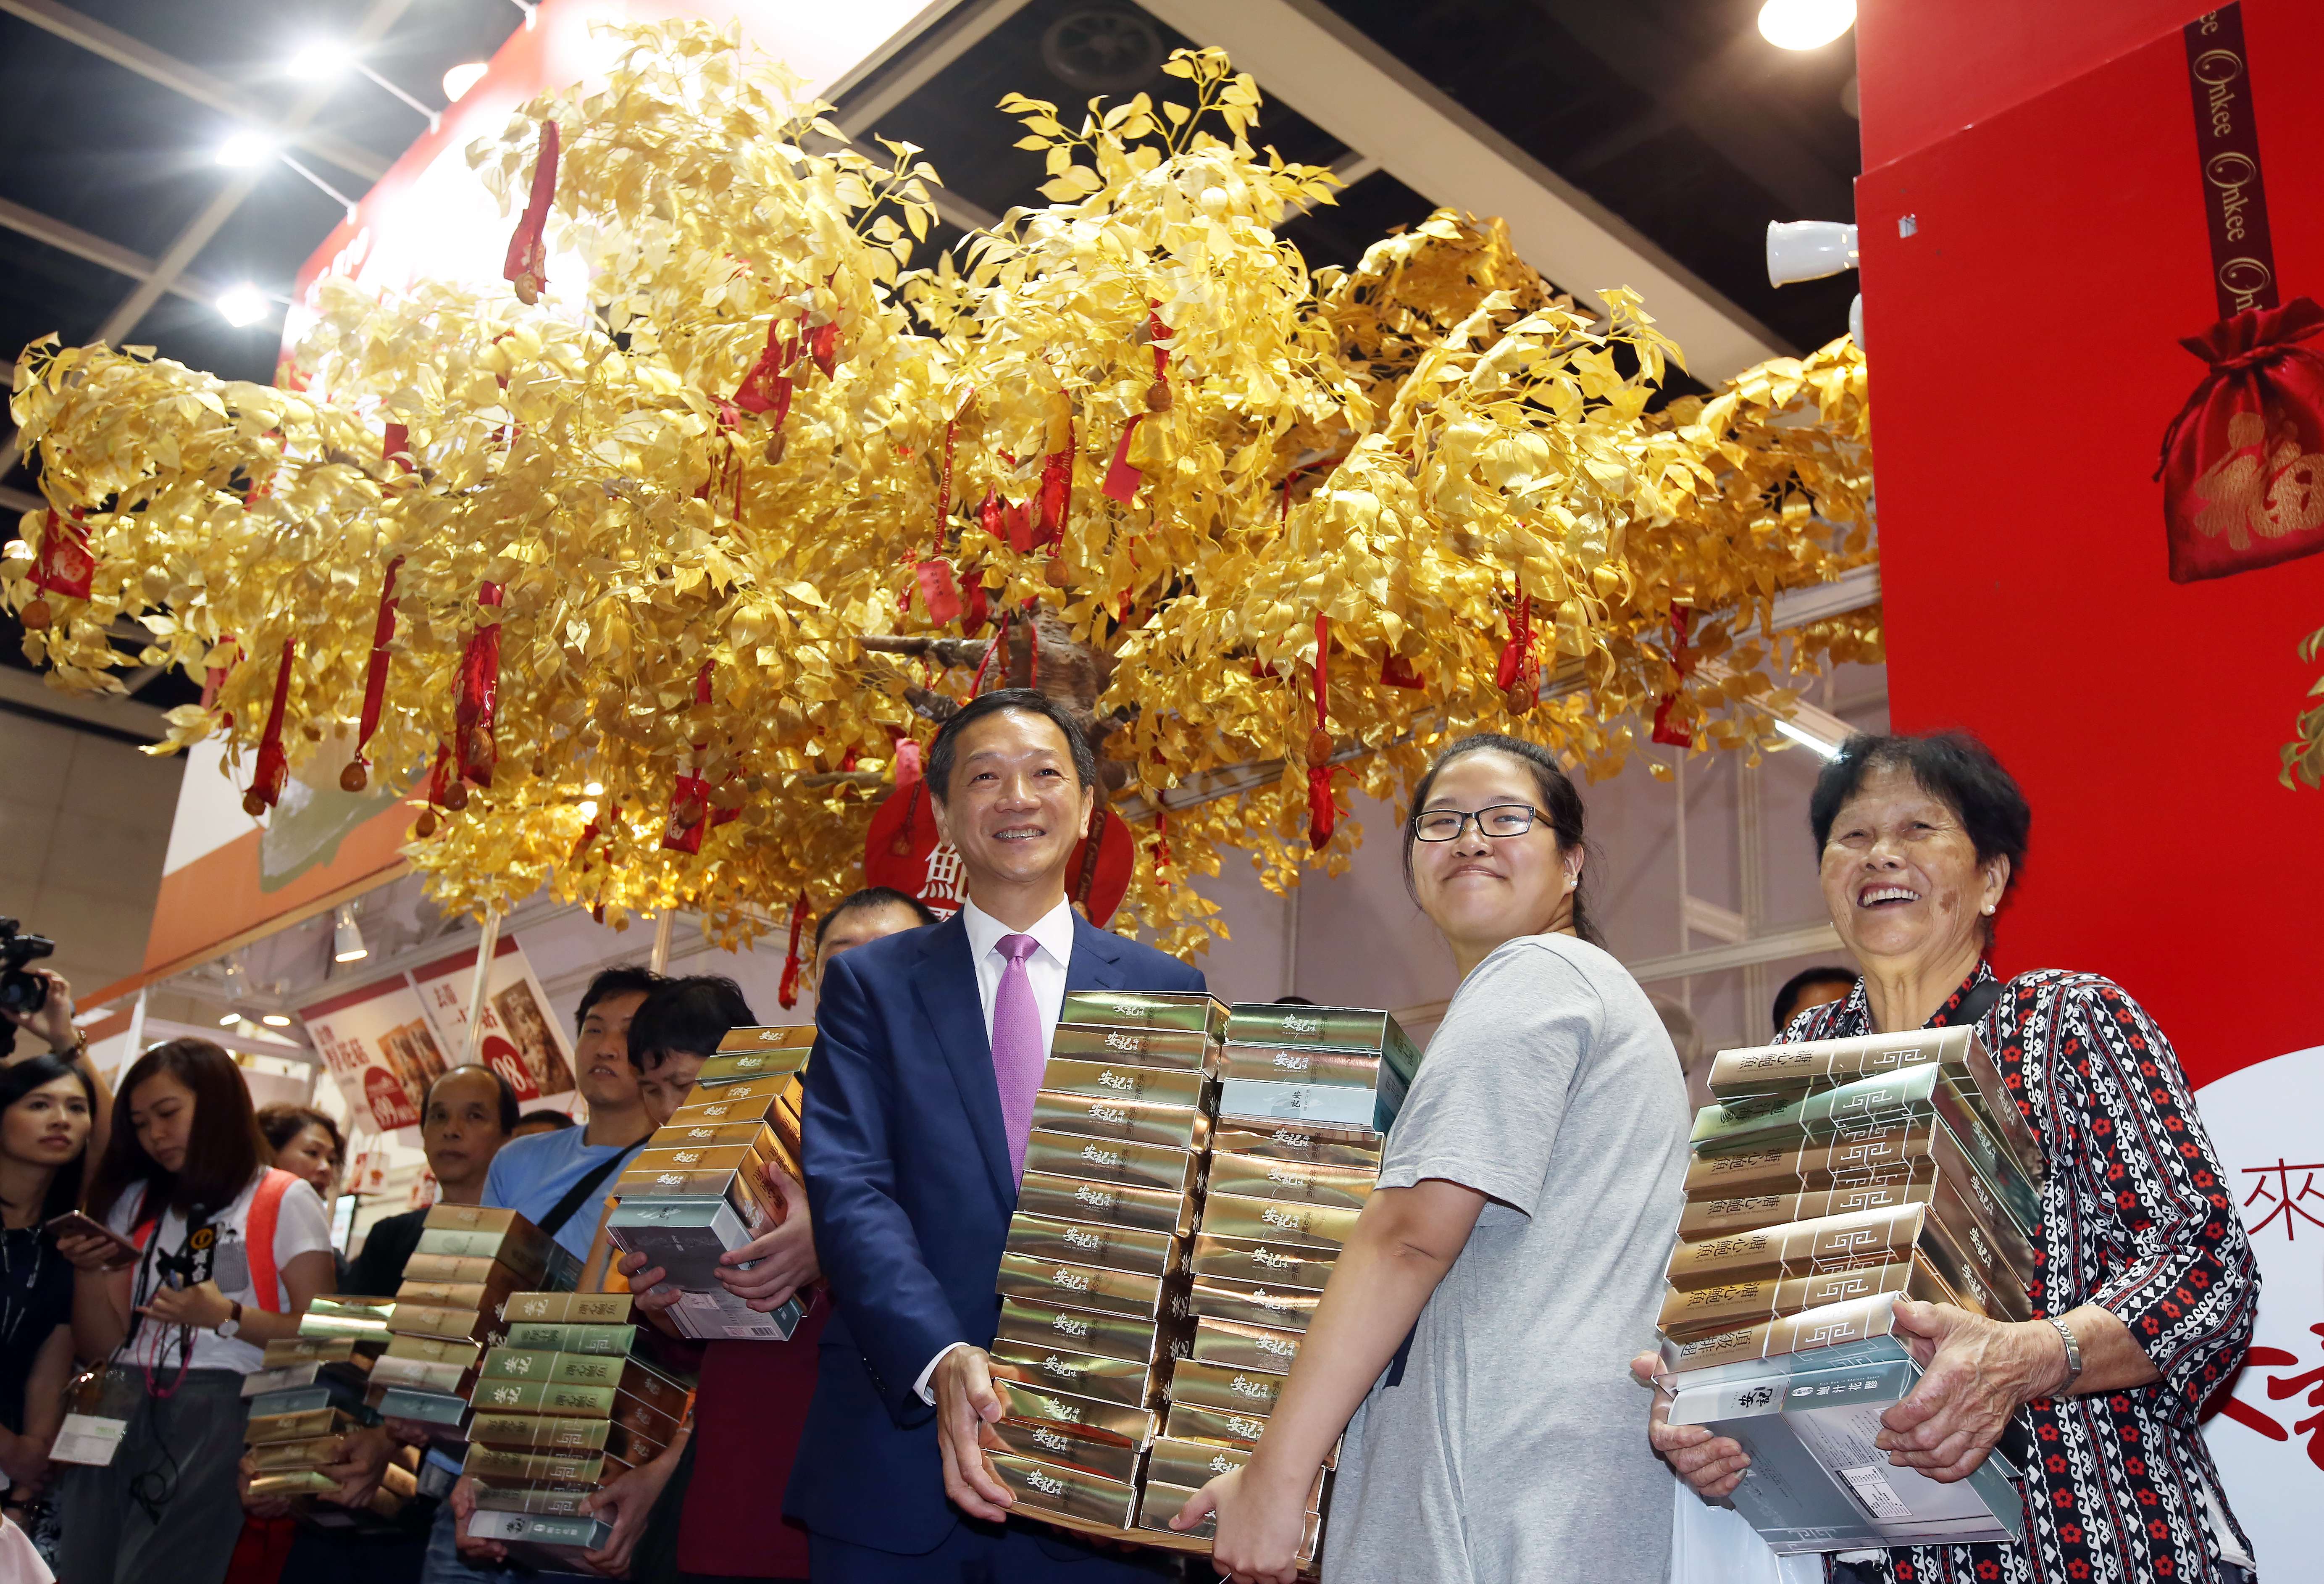 Richard Poon Kuen-fai, director of On Kee Dry Seafood, presents 21 boxes of abalone to the winners of the wishing tree contest on Thursday. Photo: Nora Tam